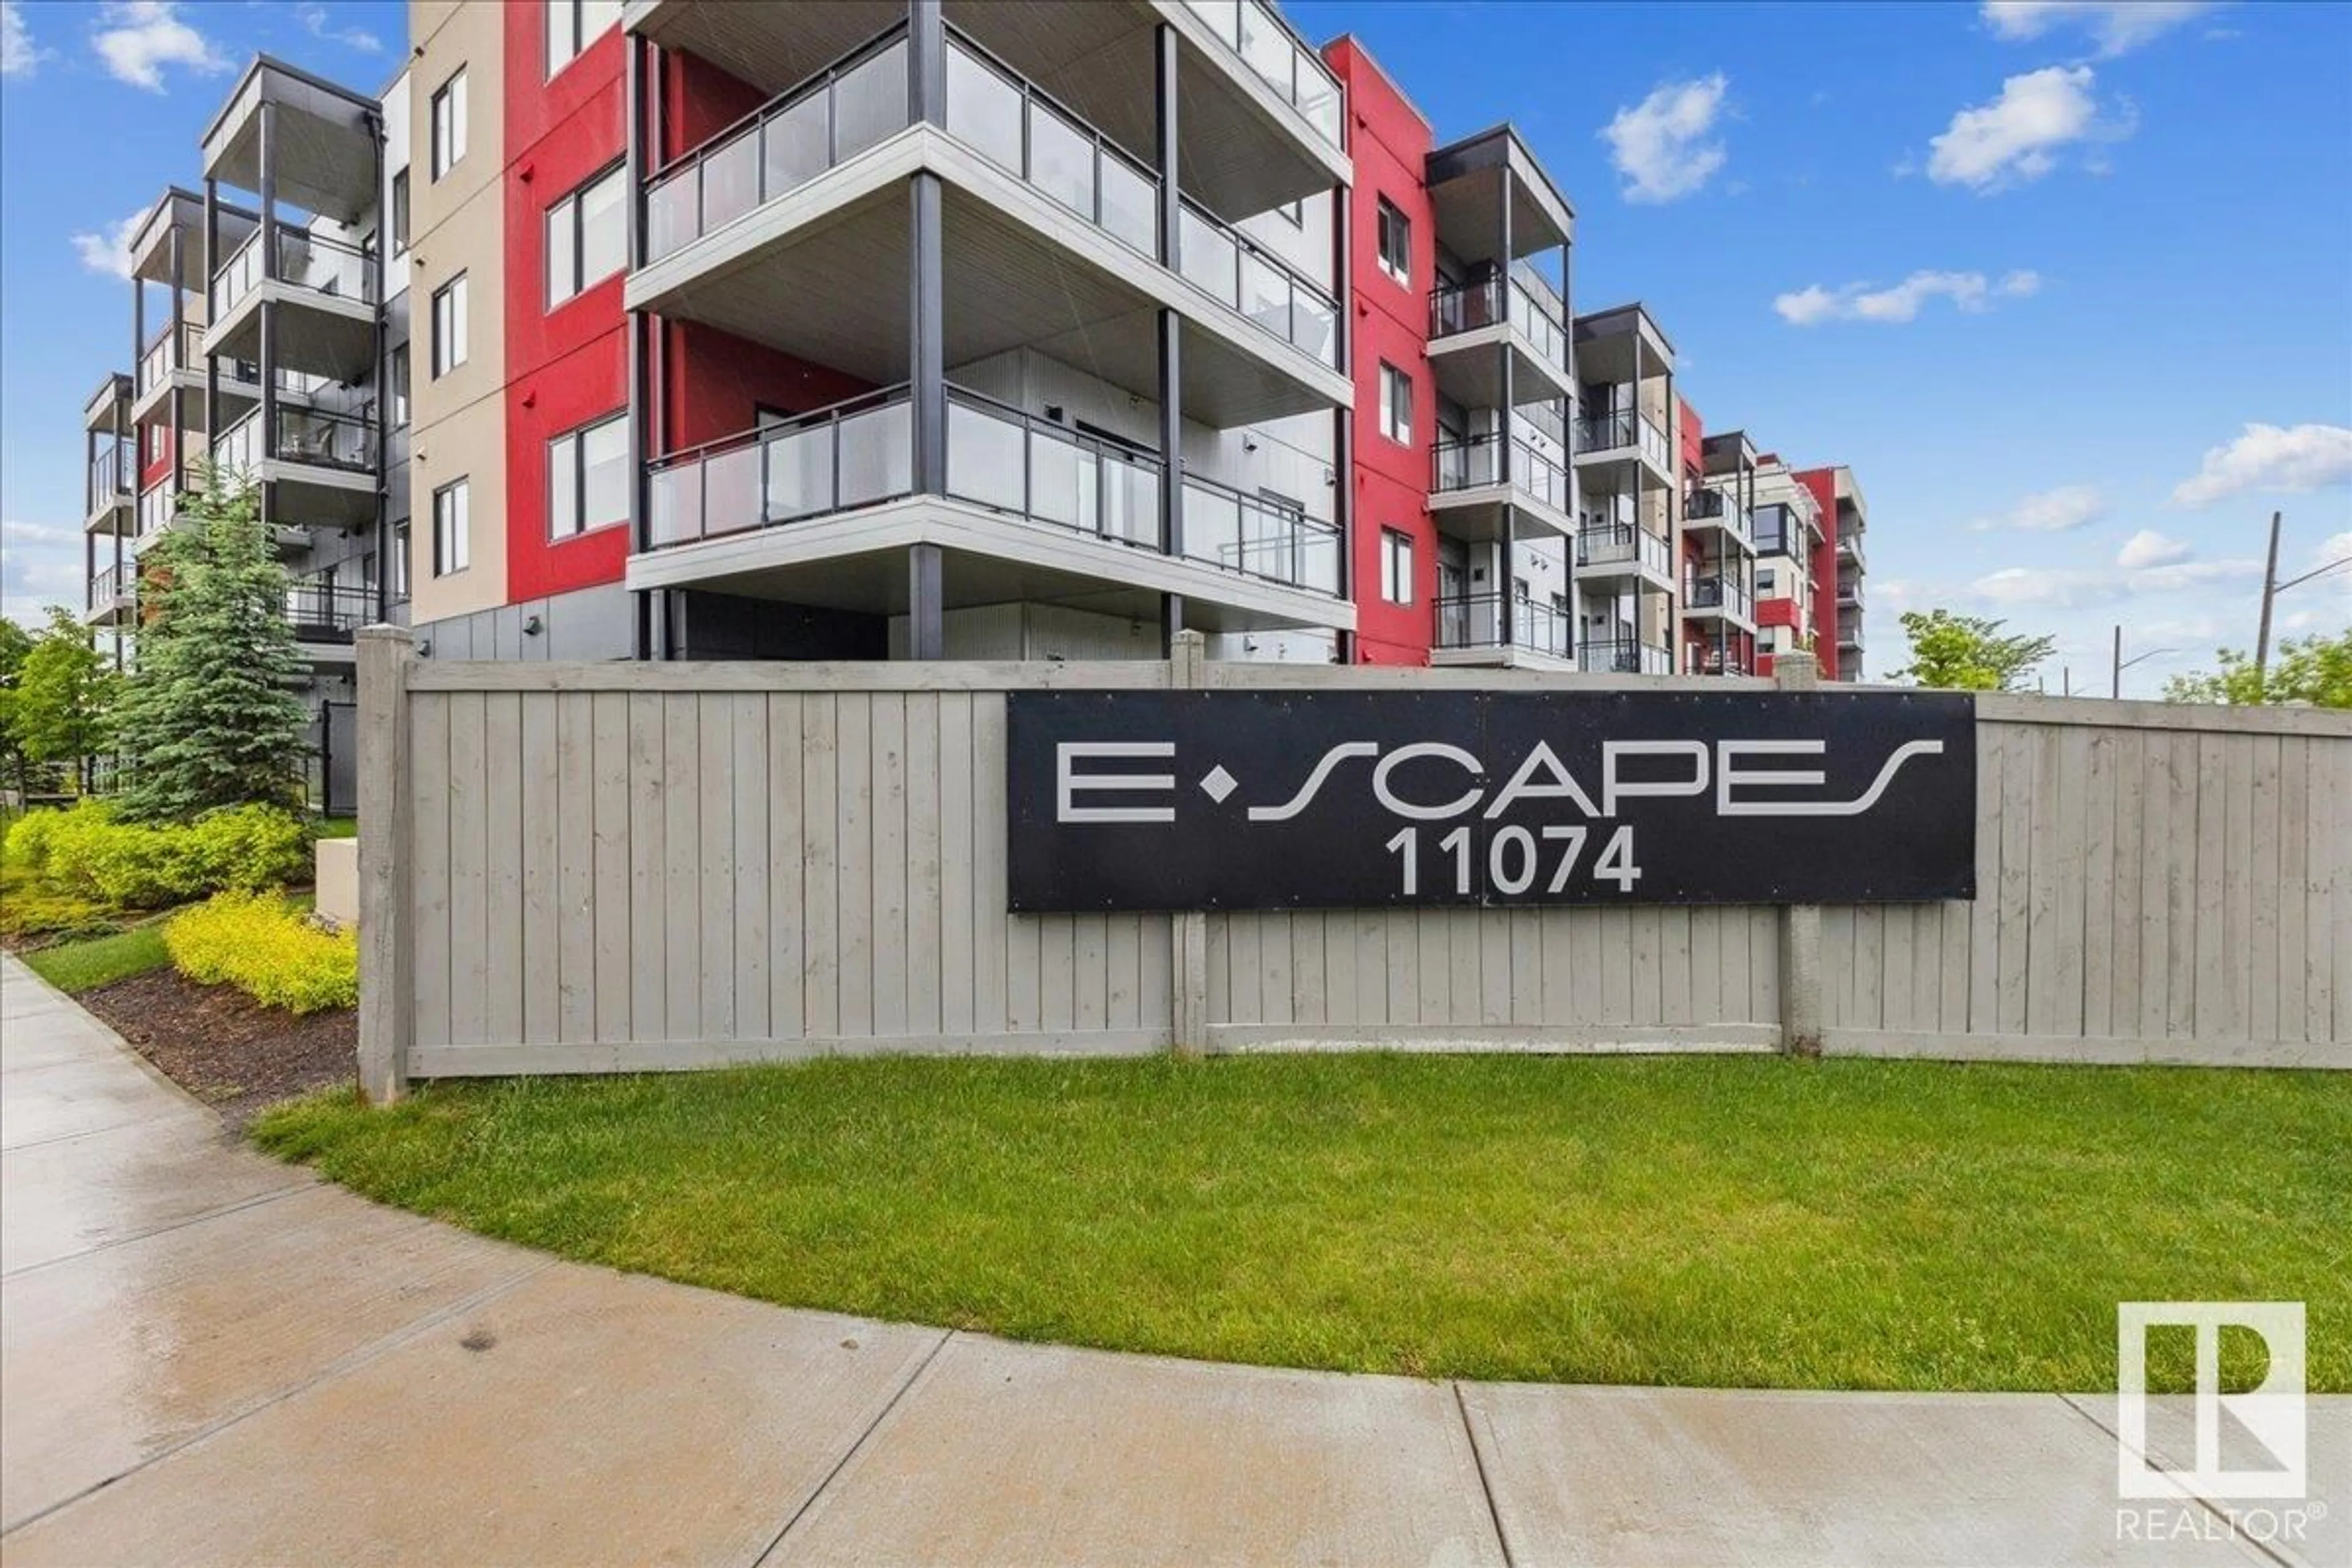 A pic from exterior of the house or condo for #227 11074 ELLERSLIE RD SW, Edmonton Alberta T6W2C2